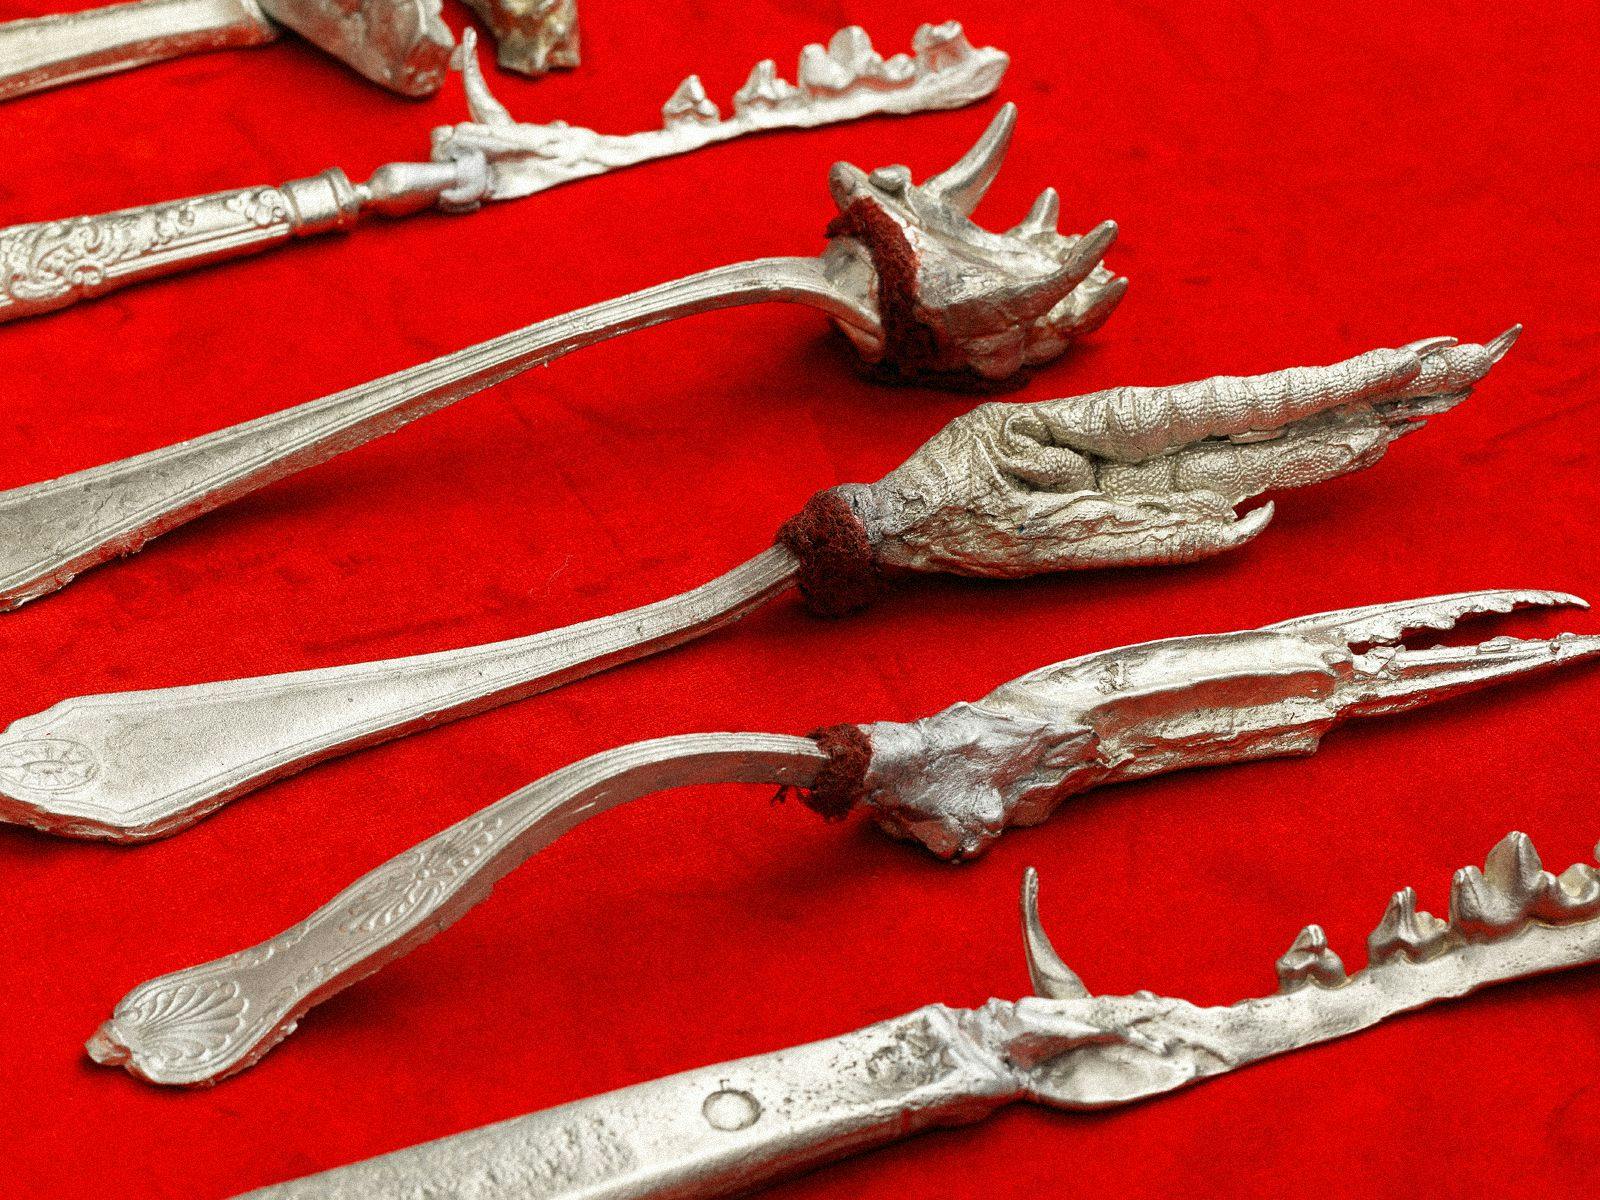 Several strange metal eating utensils, with animal features in place of blades or prongs.